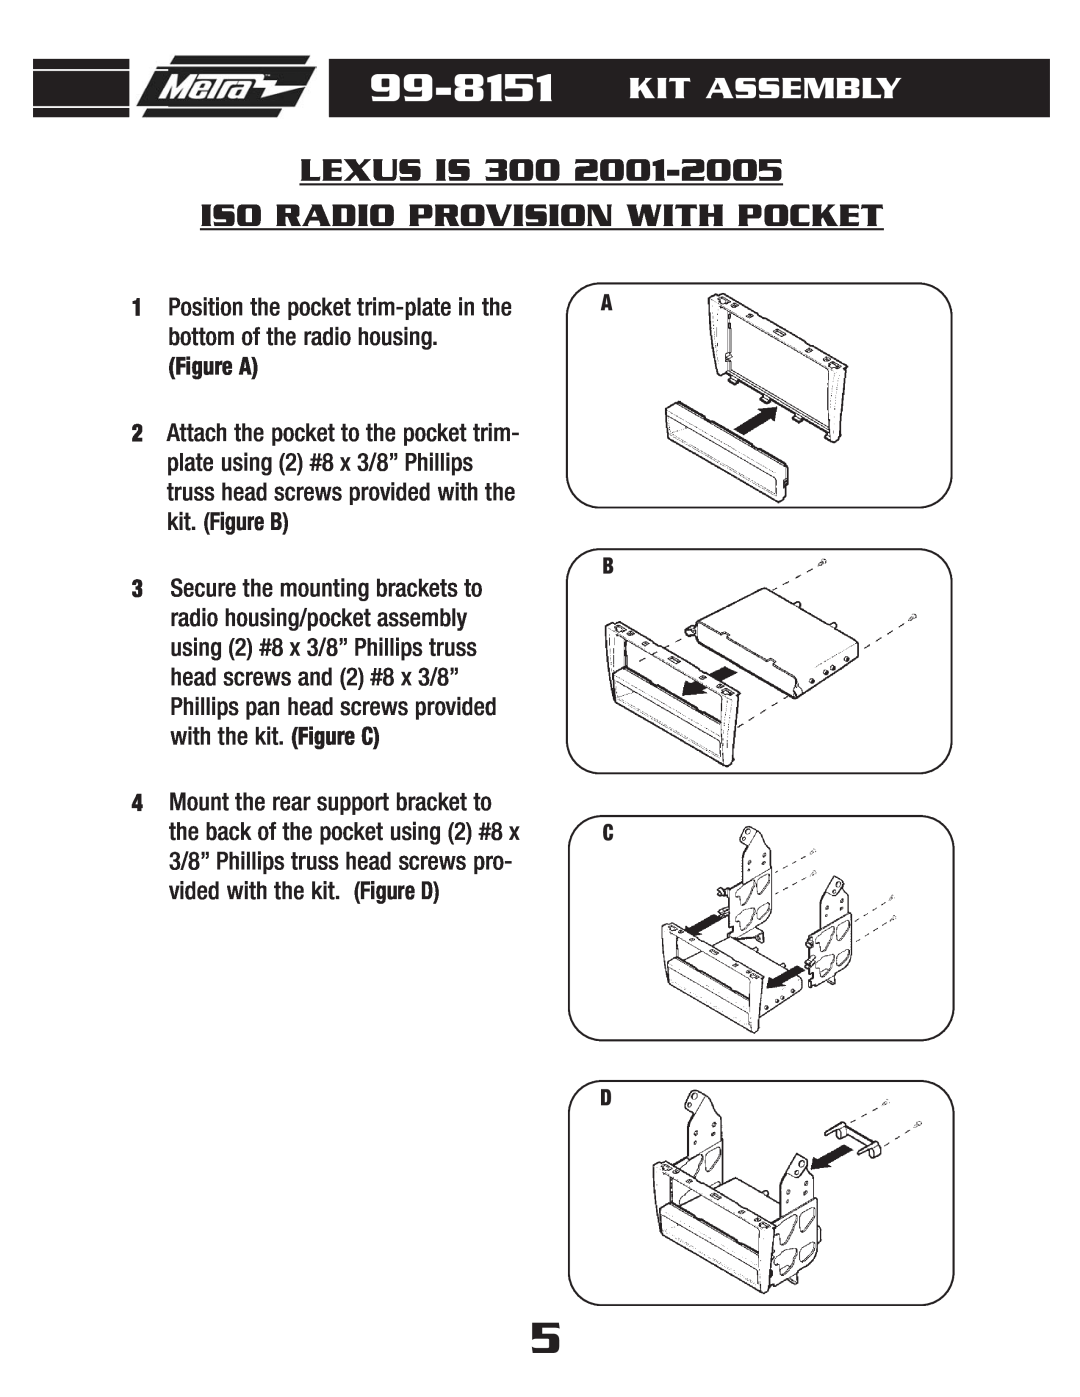 Metra Electronics 99-8151 installation instructions LEXUS IS 300 ISO RADIO PROVISION WITH POCKET, Kit Assembly 